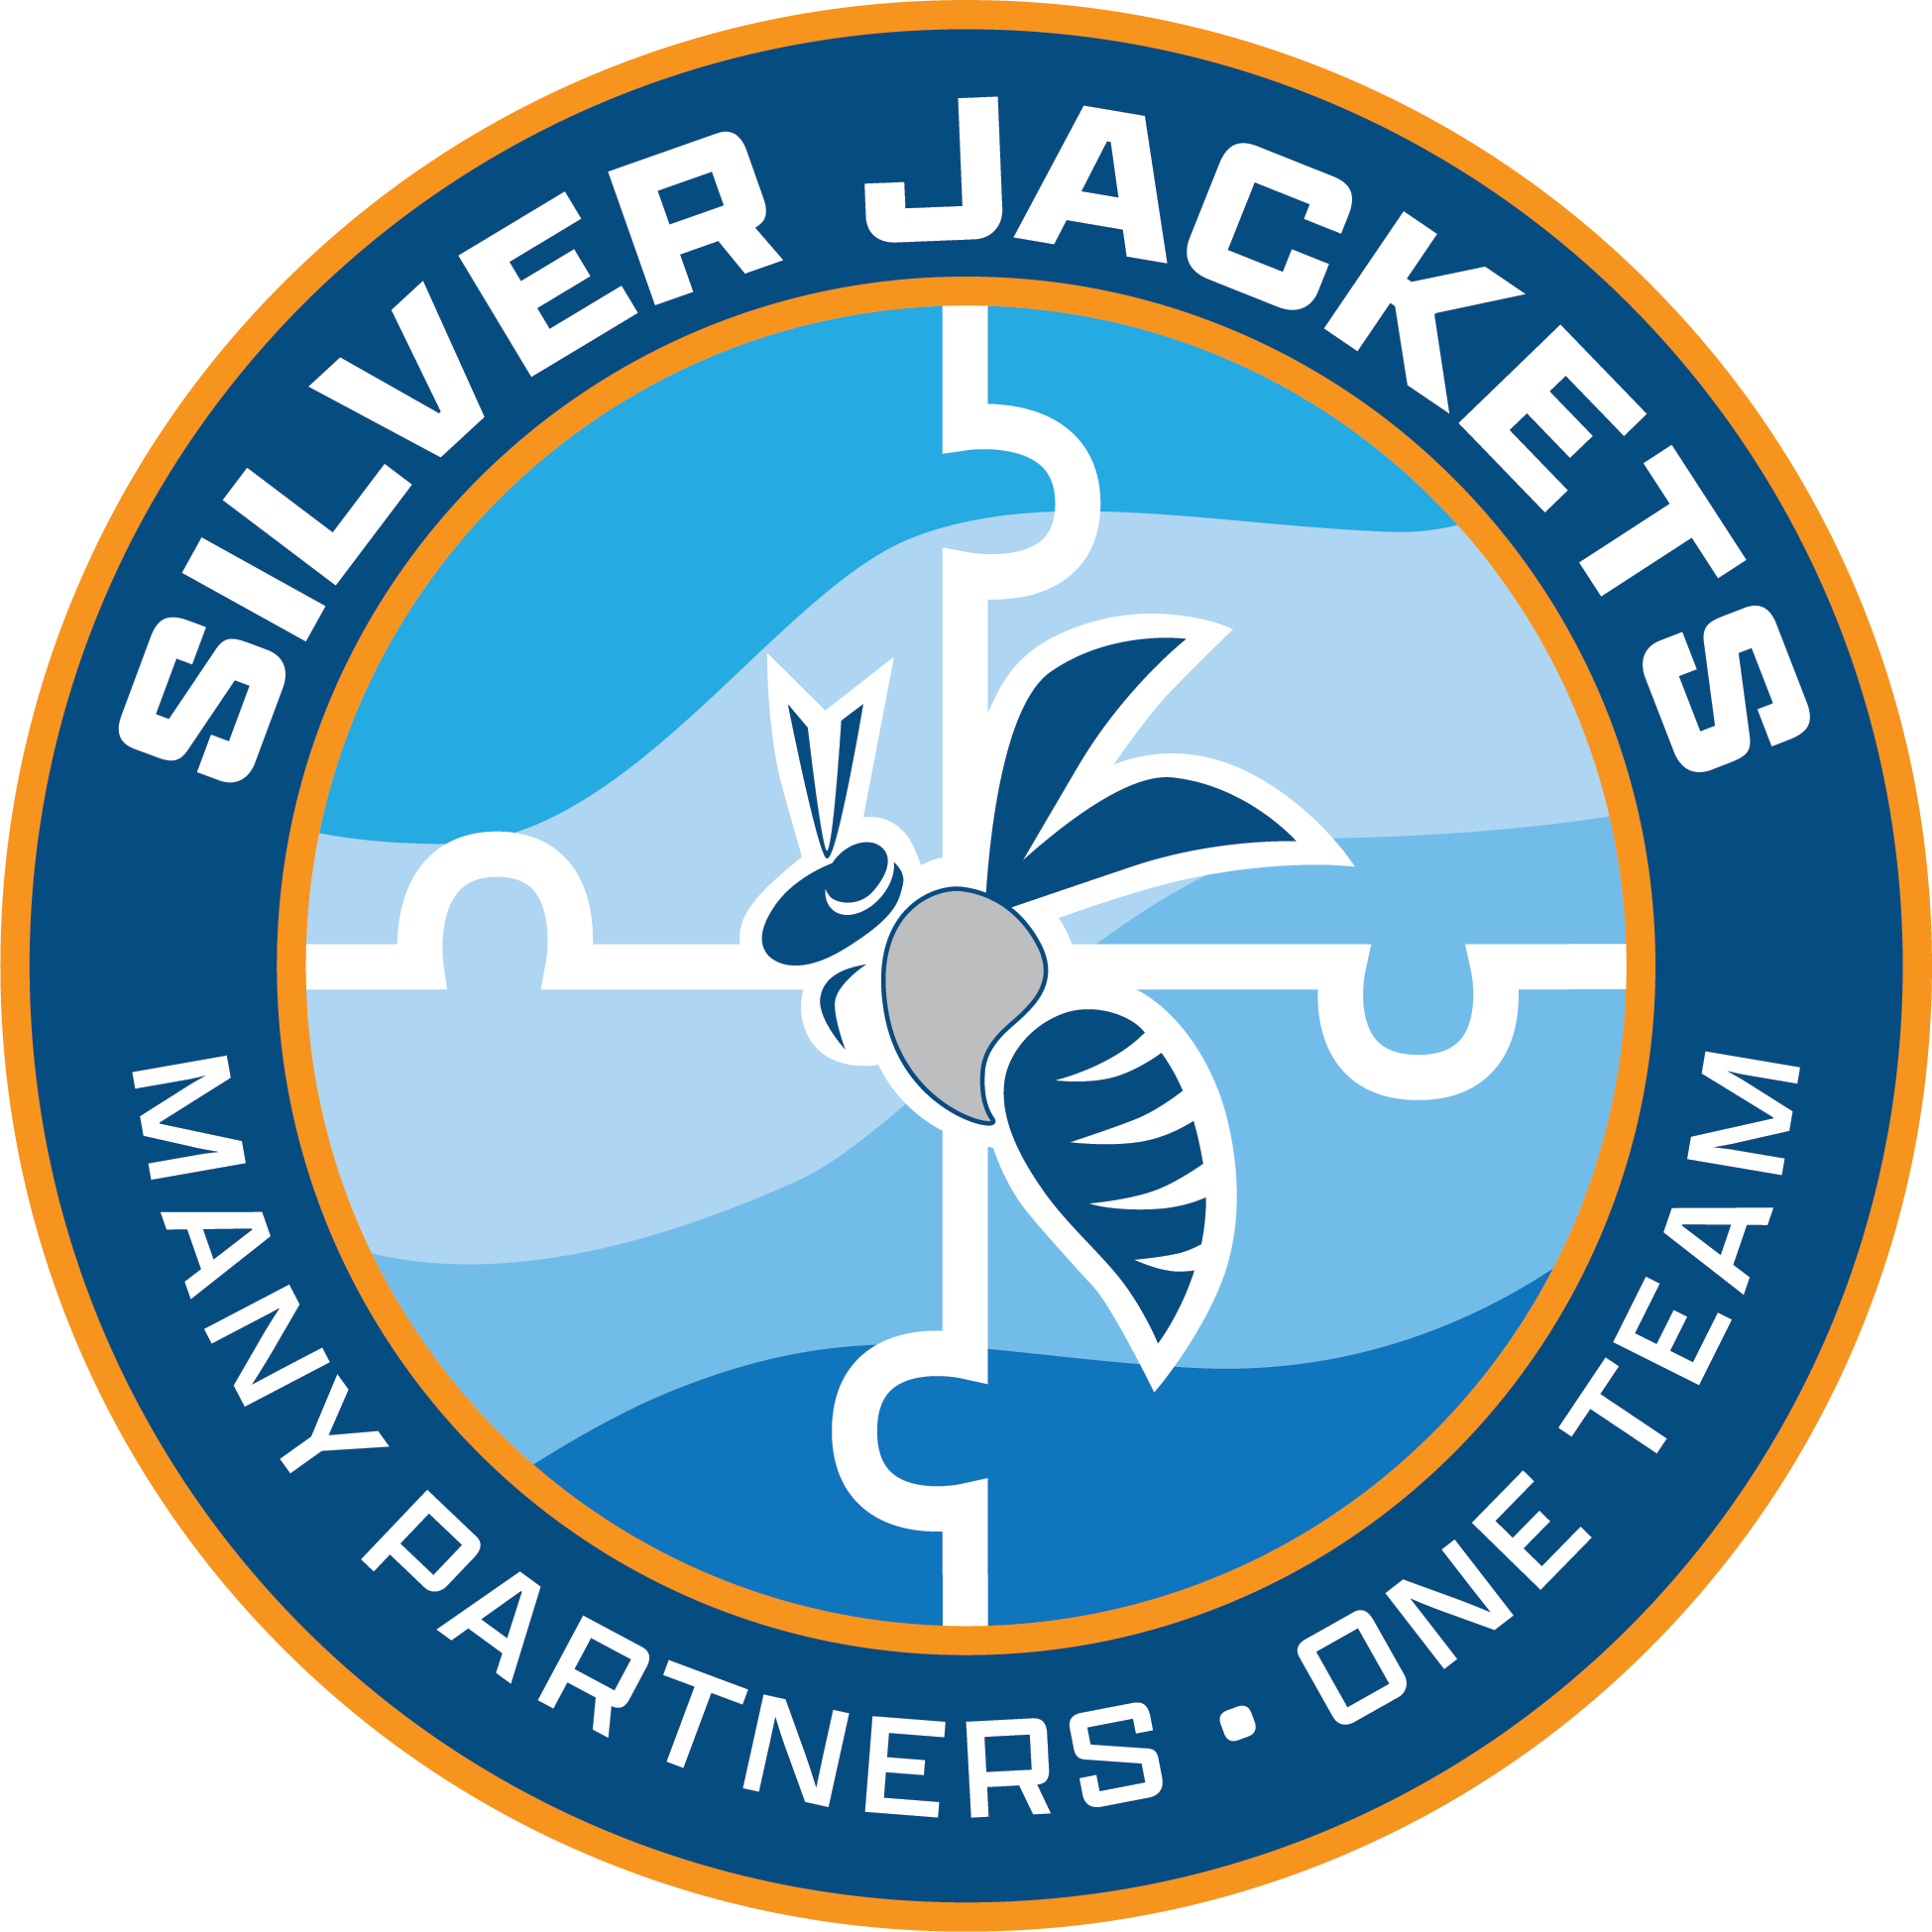 Maps developed in cooperation with the Alaska Silver Jackets